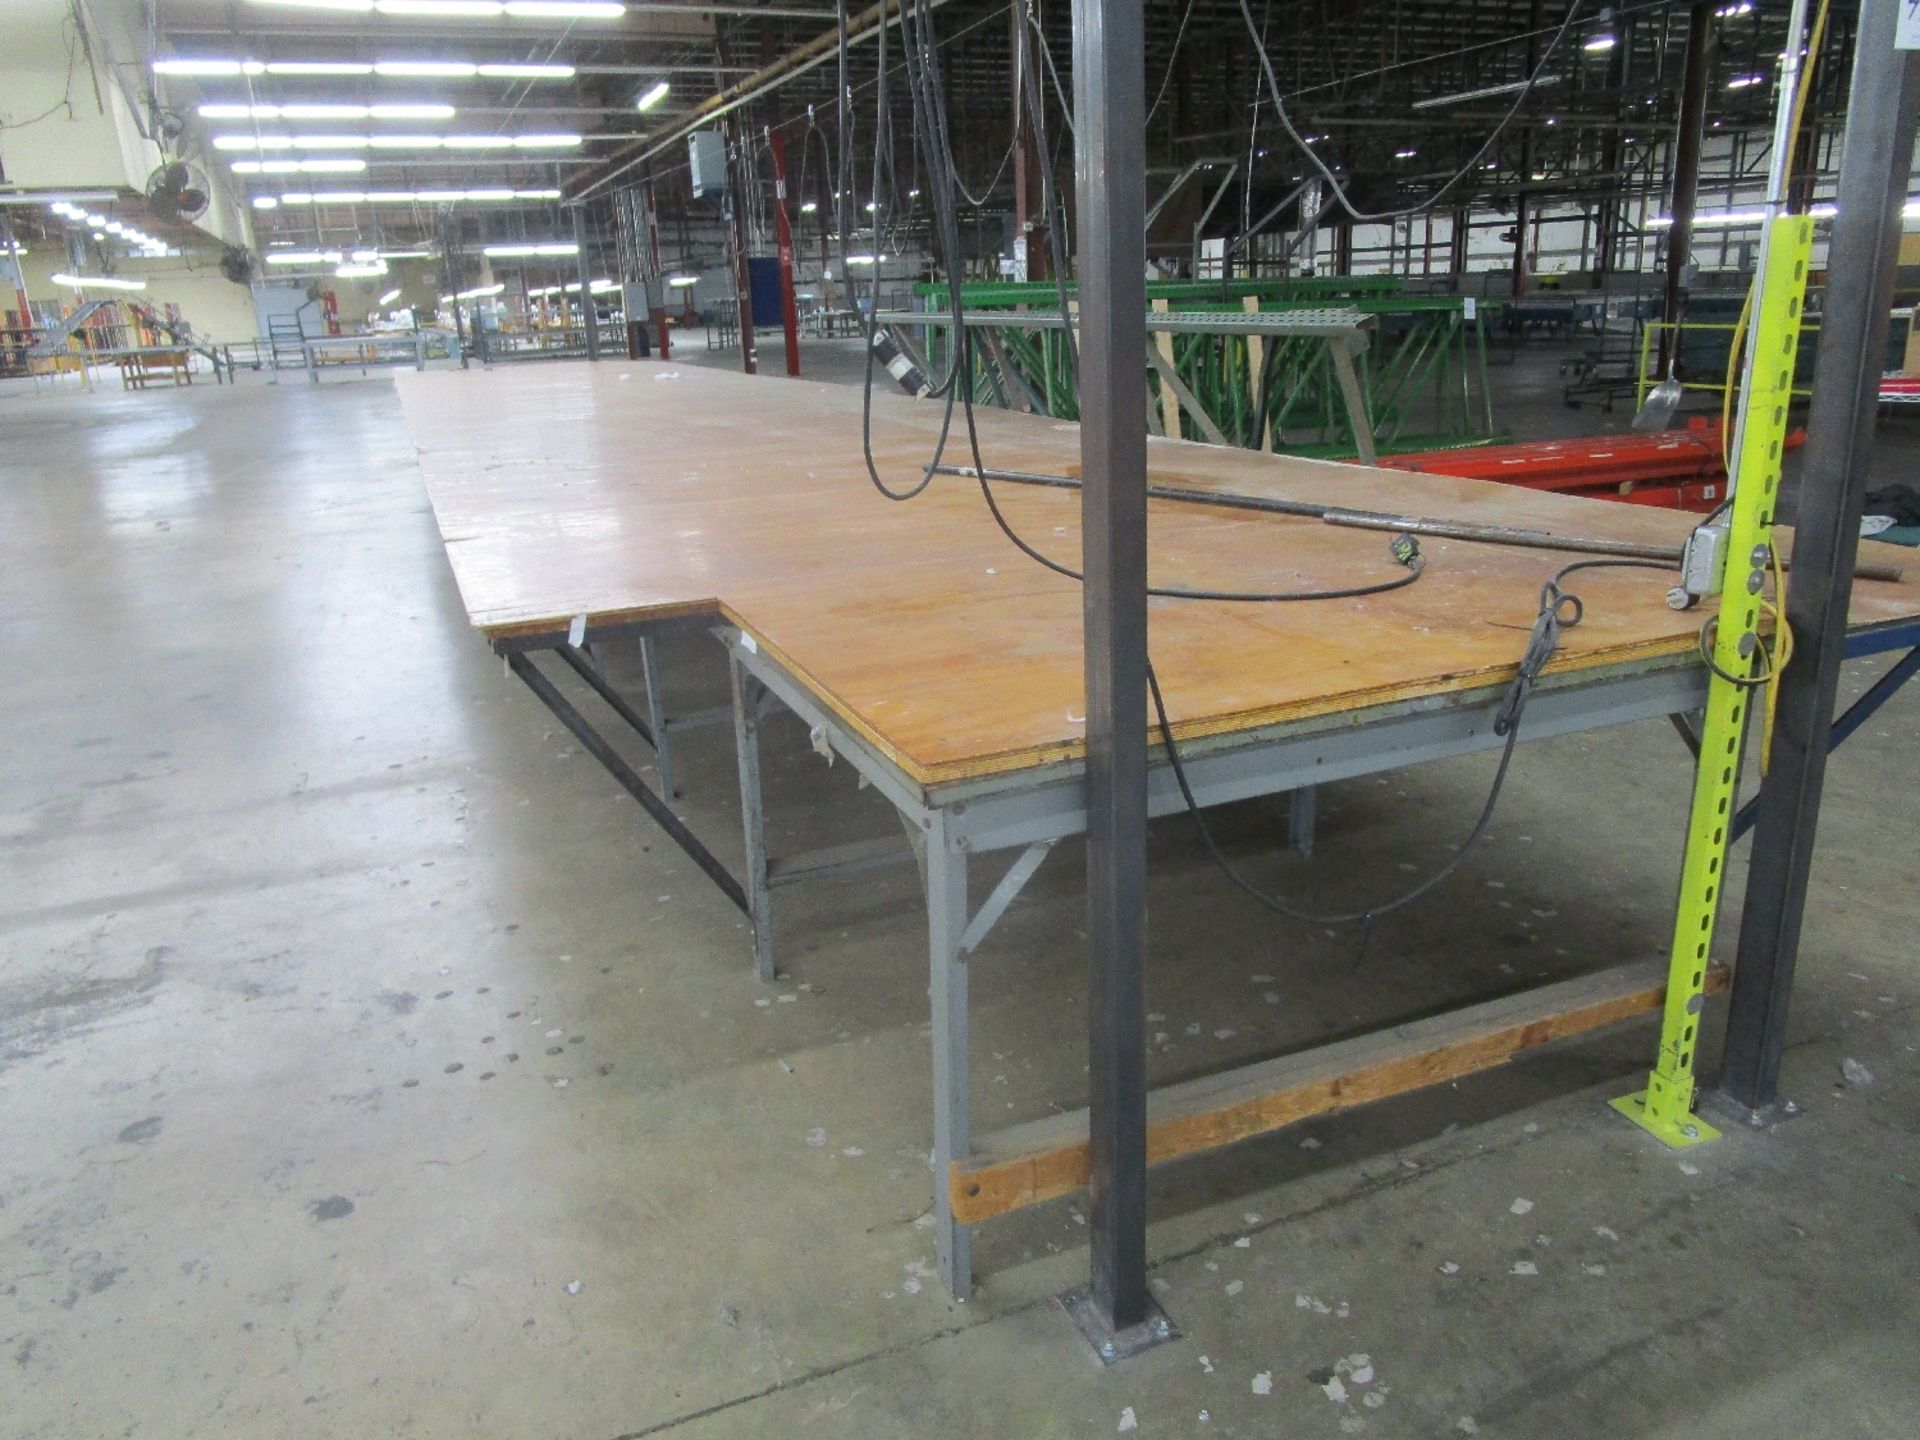 30' x 8' Assembly Table